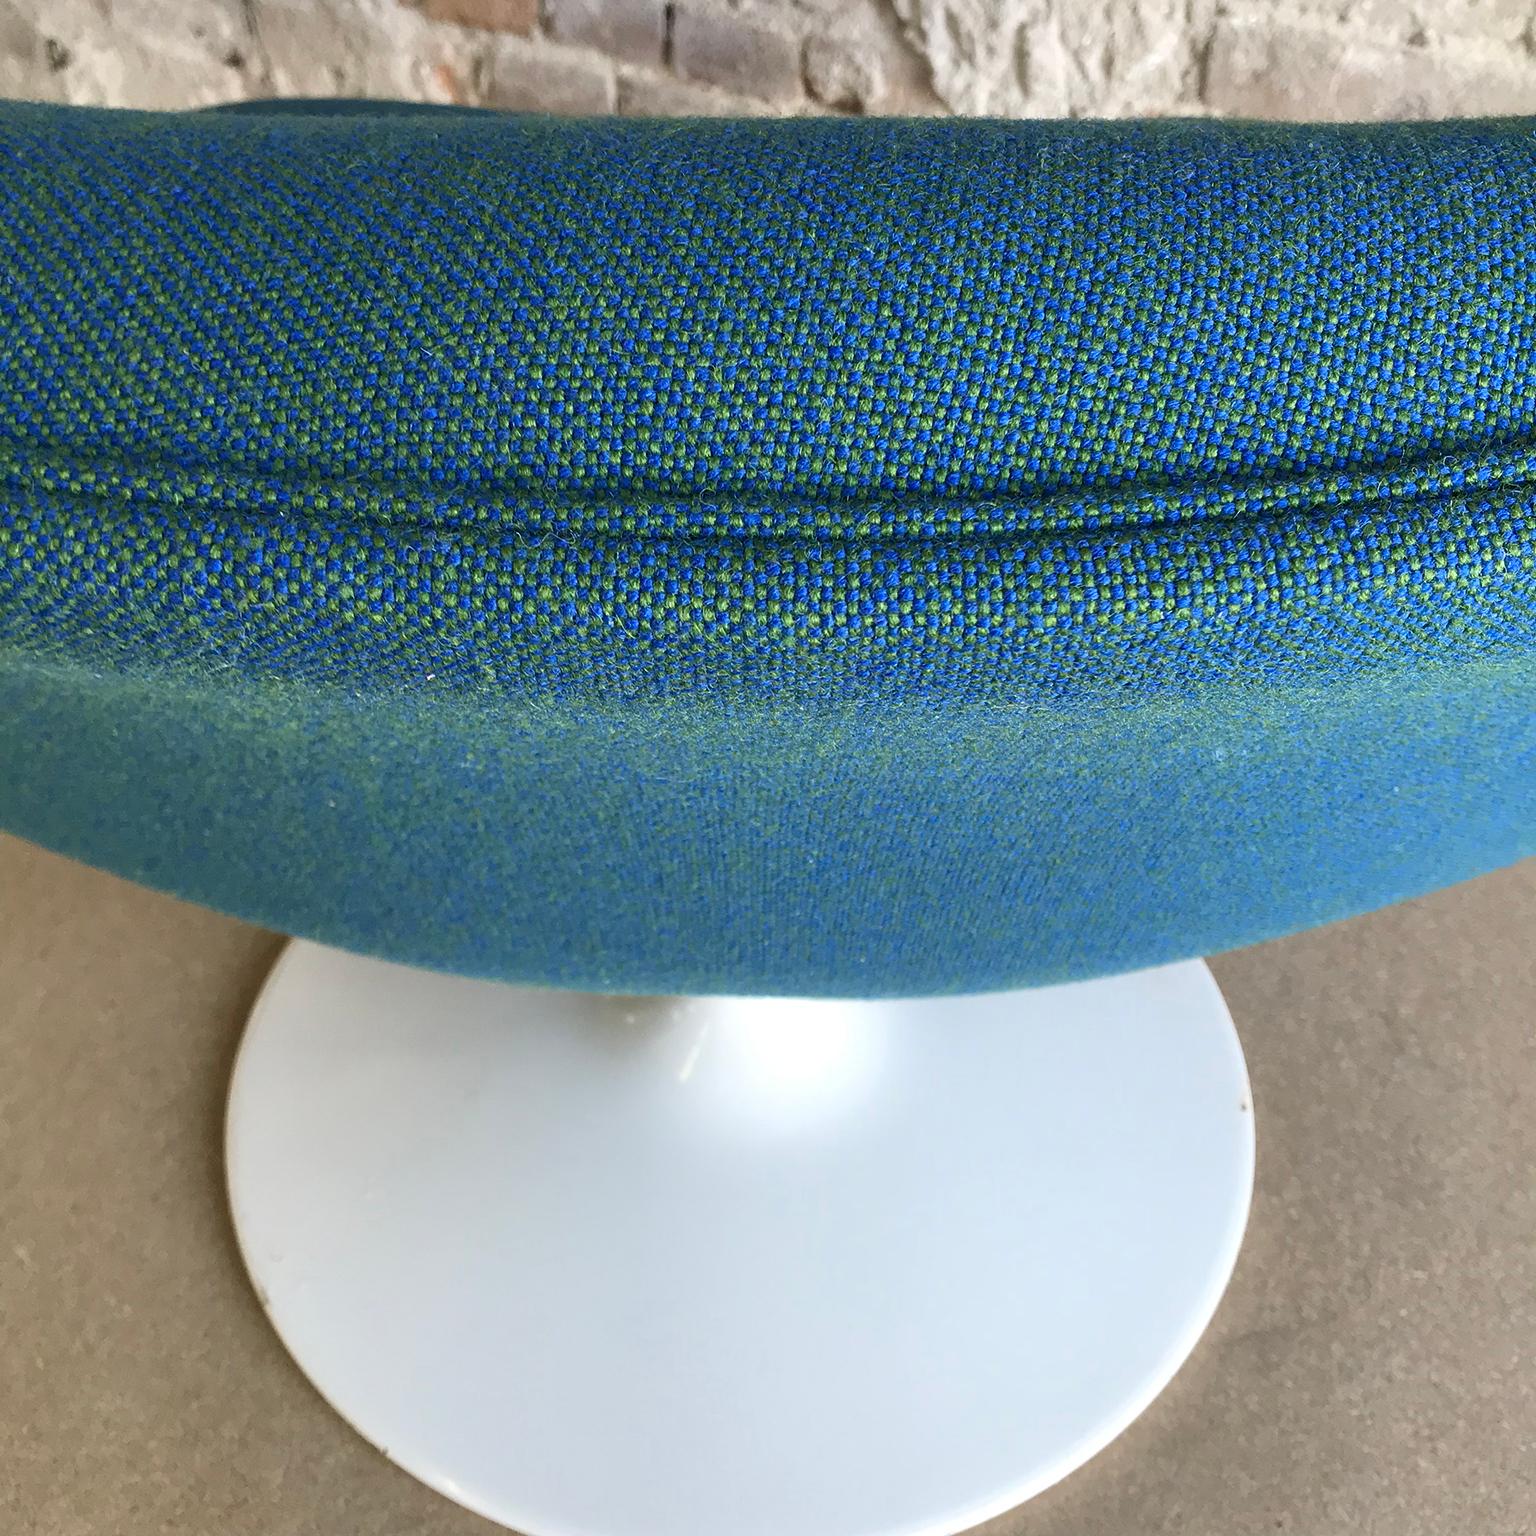 1977, Geoffrey Harcourt, Artifort 508 Chair by New Upholstery Blue Green Fabric 4